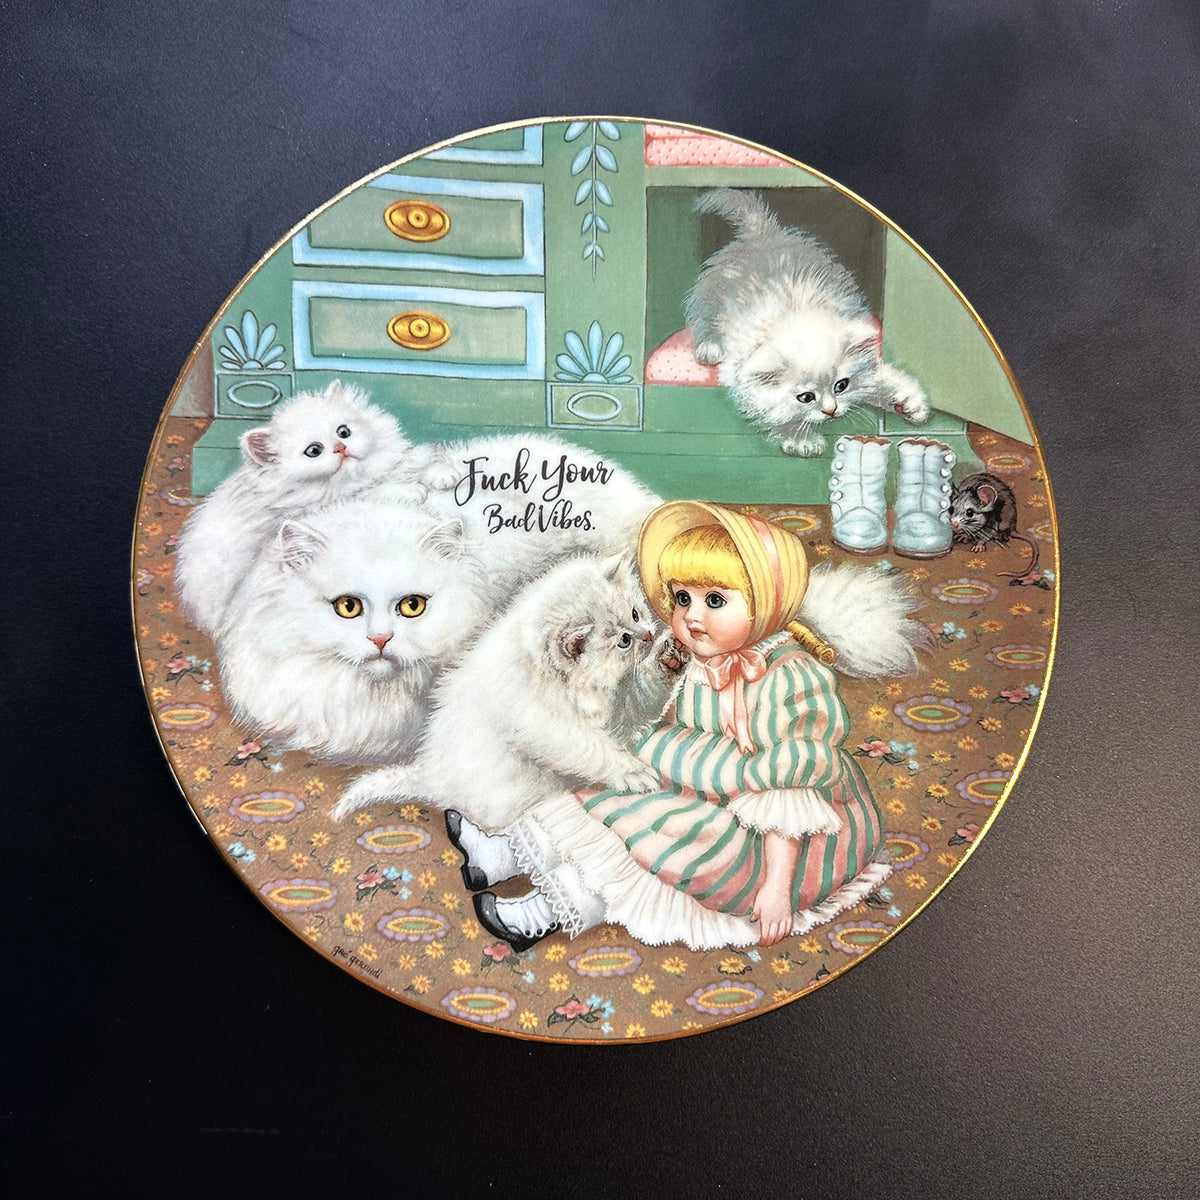 Vintage Art Plate - Cat plate - "Fuck Your Bad Vibes"